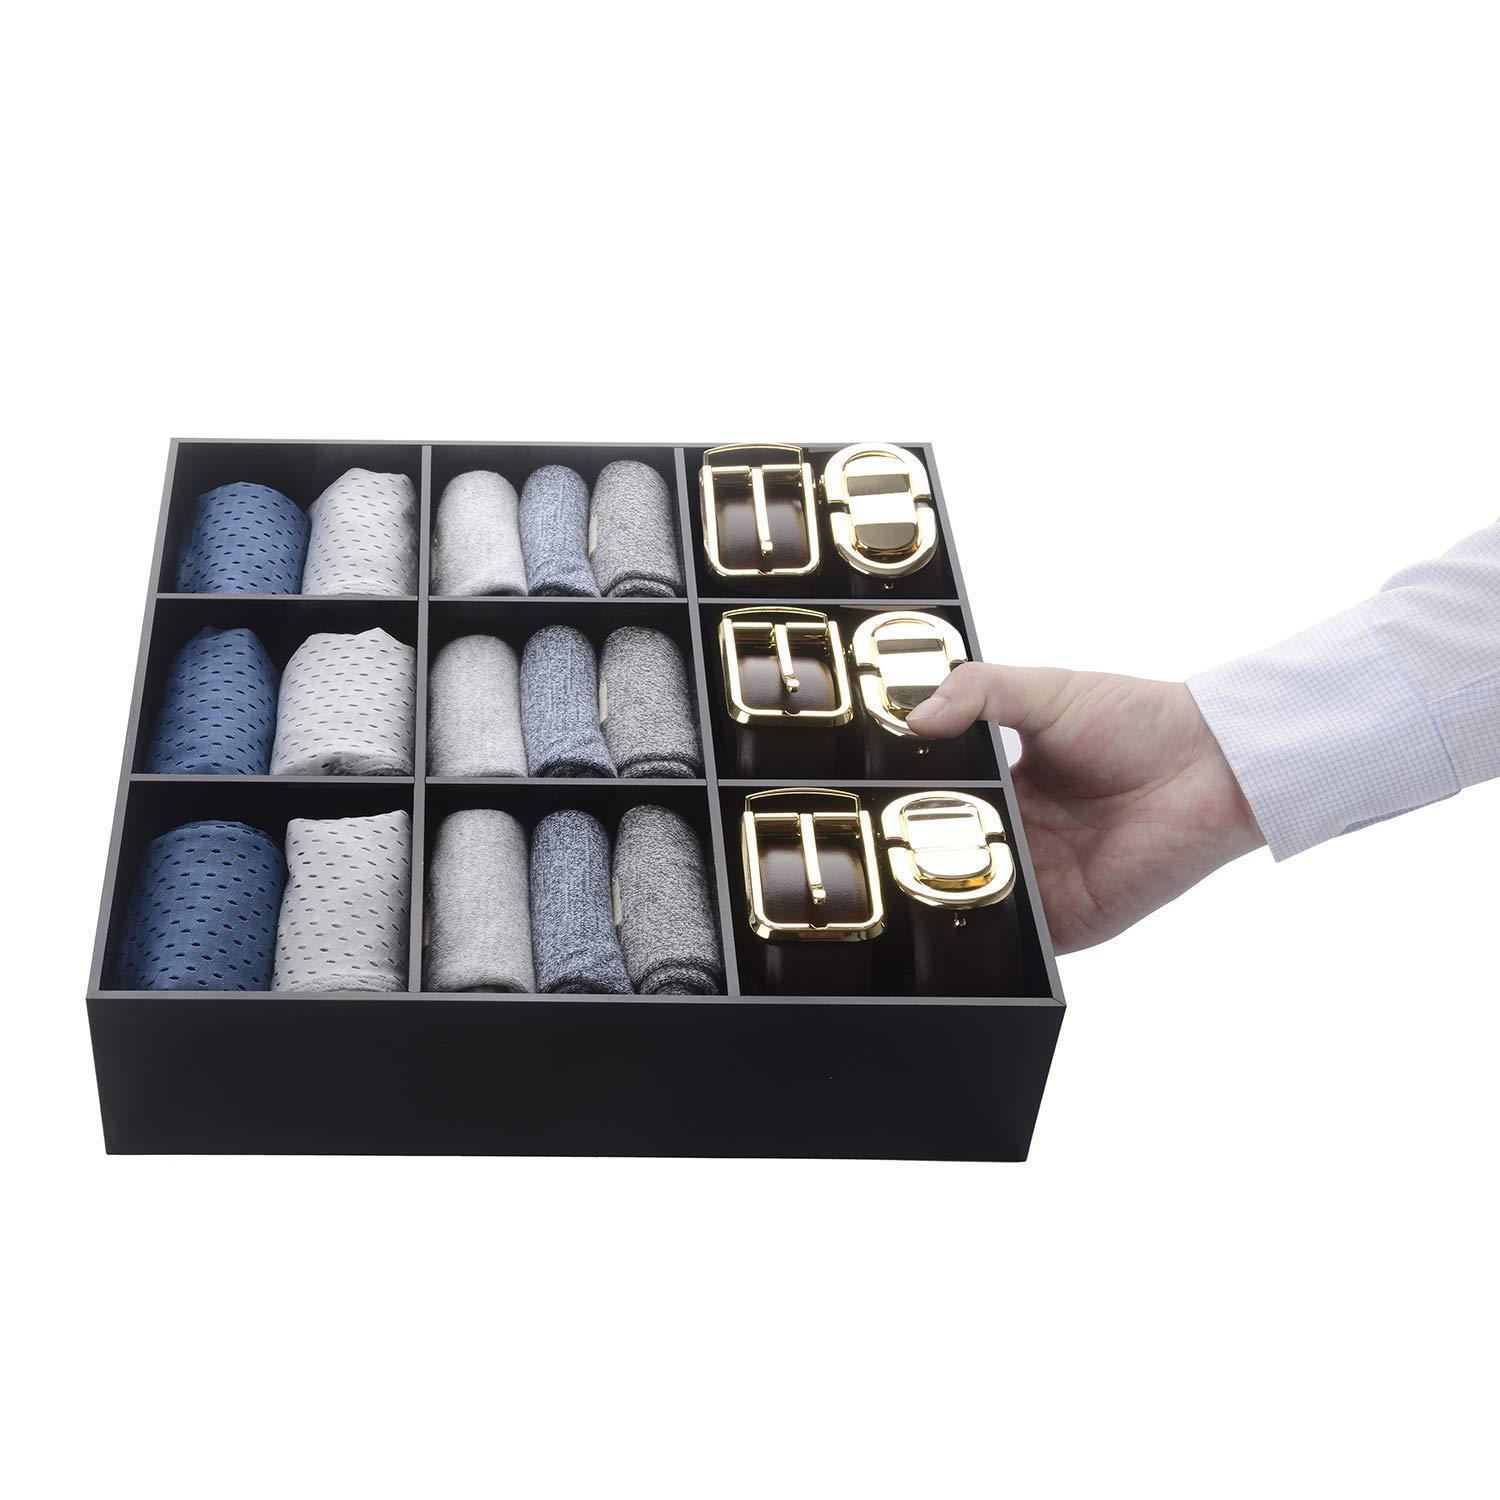 Selection luxury and stylish acrylic organizer fine and elegant gift keep belts socks ties underwear panties briefs boxers scarves organized drawer divider closet and storage box